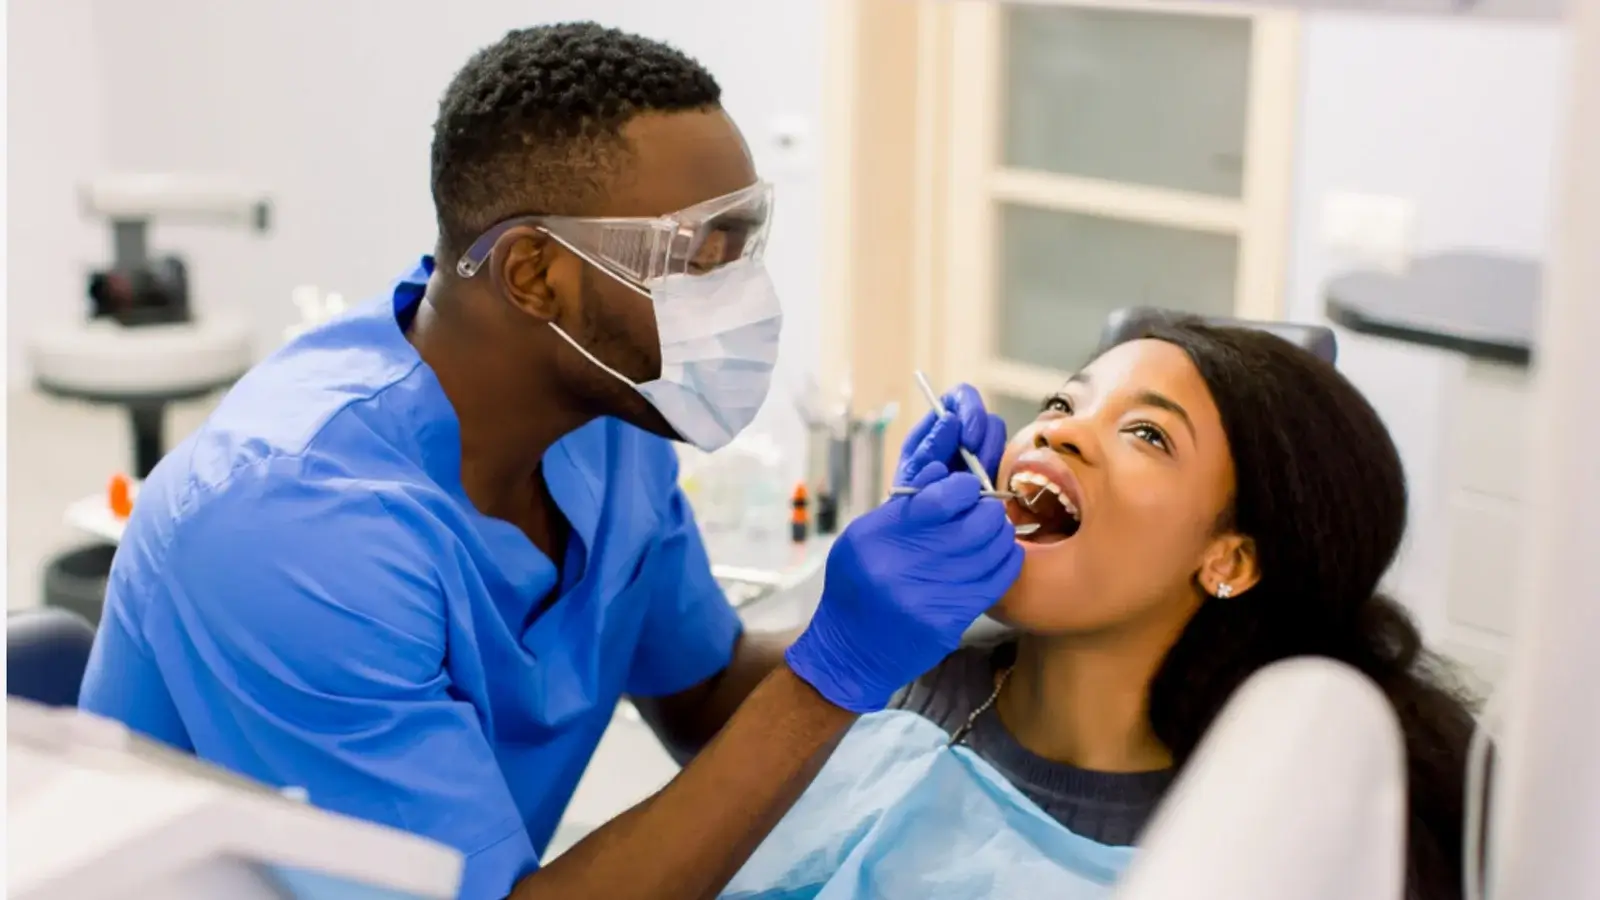 Dentist Near You - Find The Best Dental Clinic Near You For Free